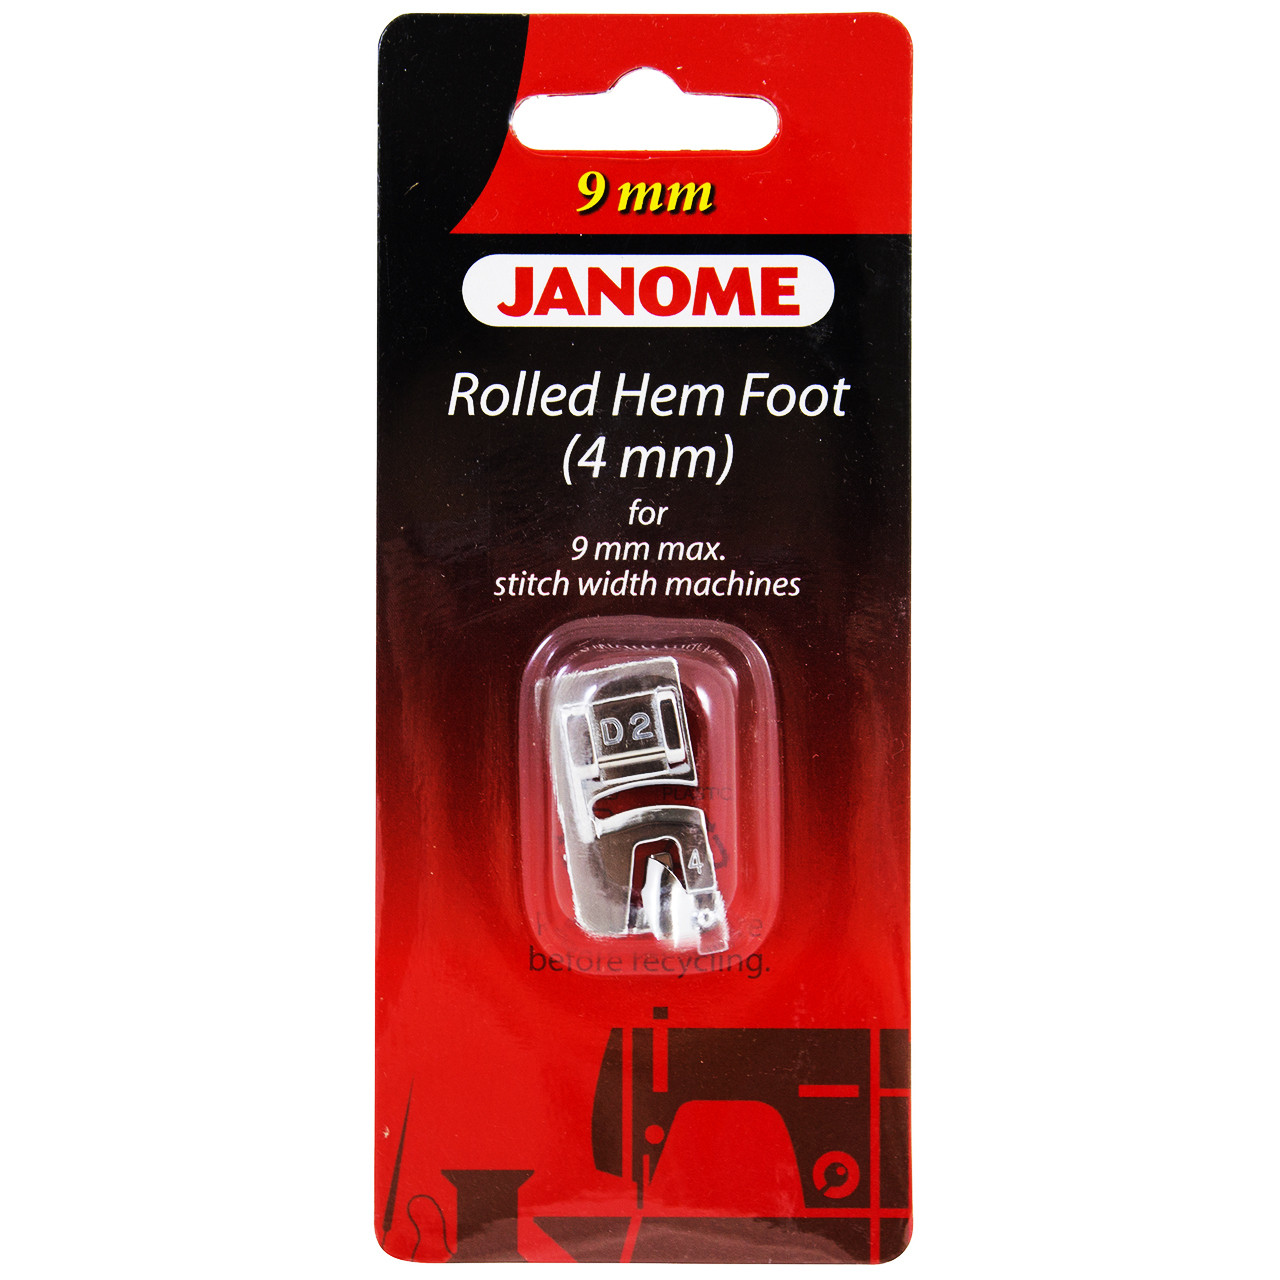 Janome Rolled Hem D2 Foot (4mm), 9mm - Red Deer Sewing Centre